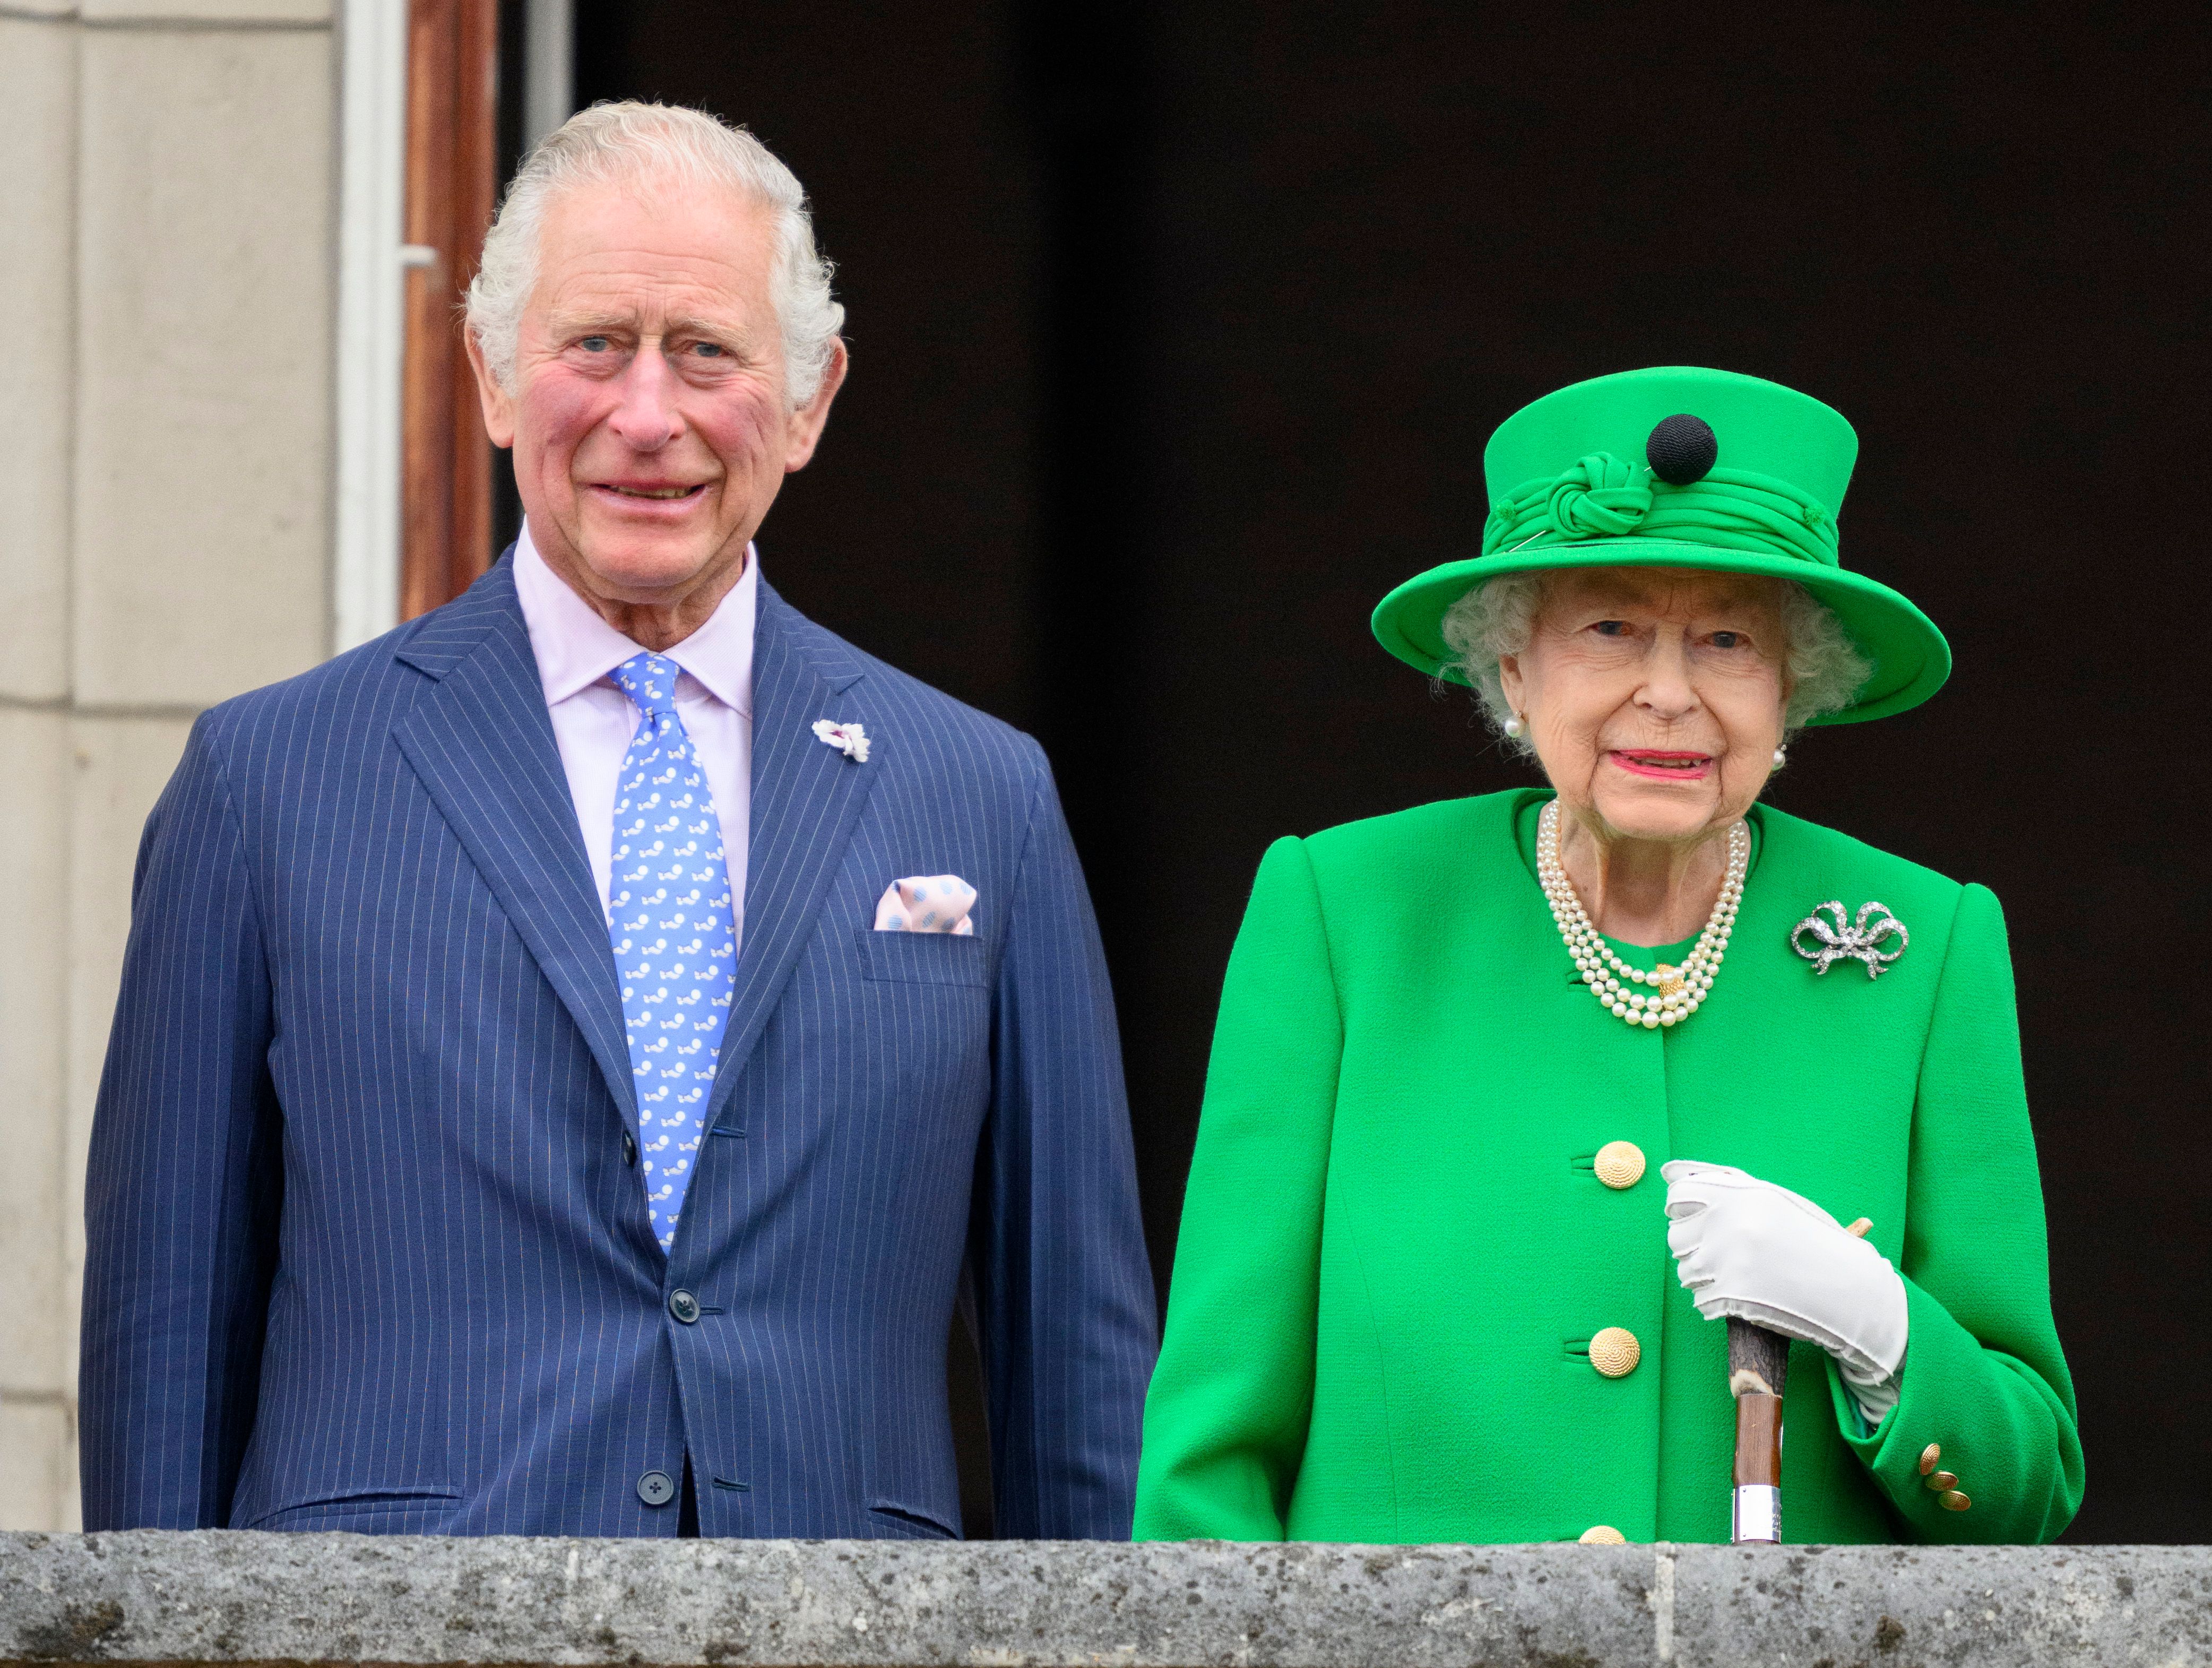 The royal family's title changes after Queen Elizabeth II's death